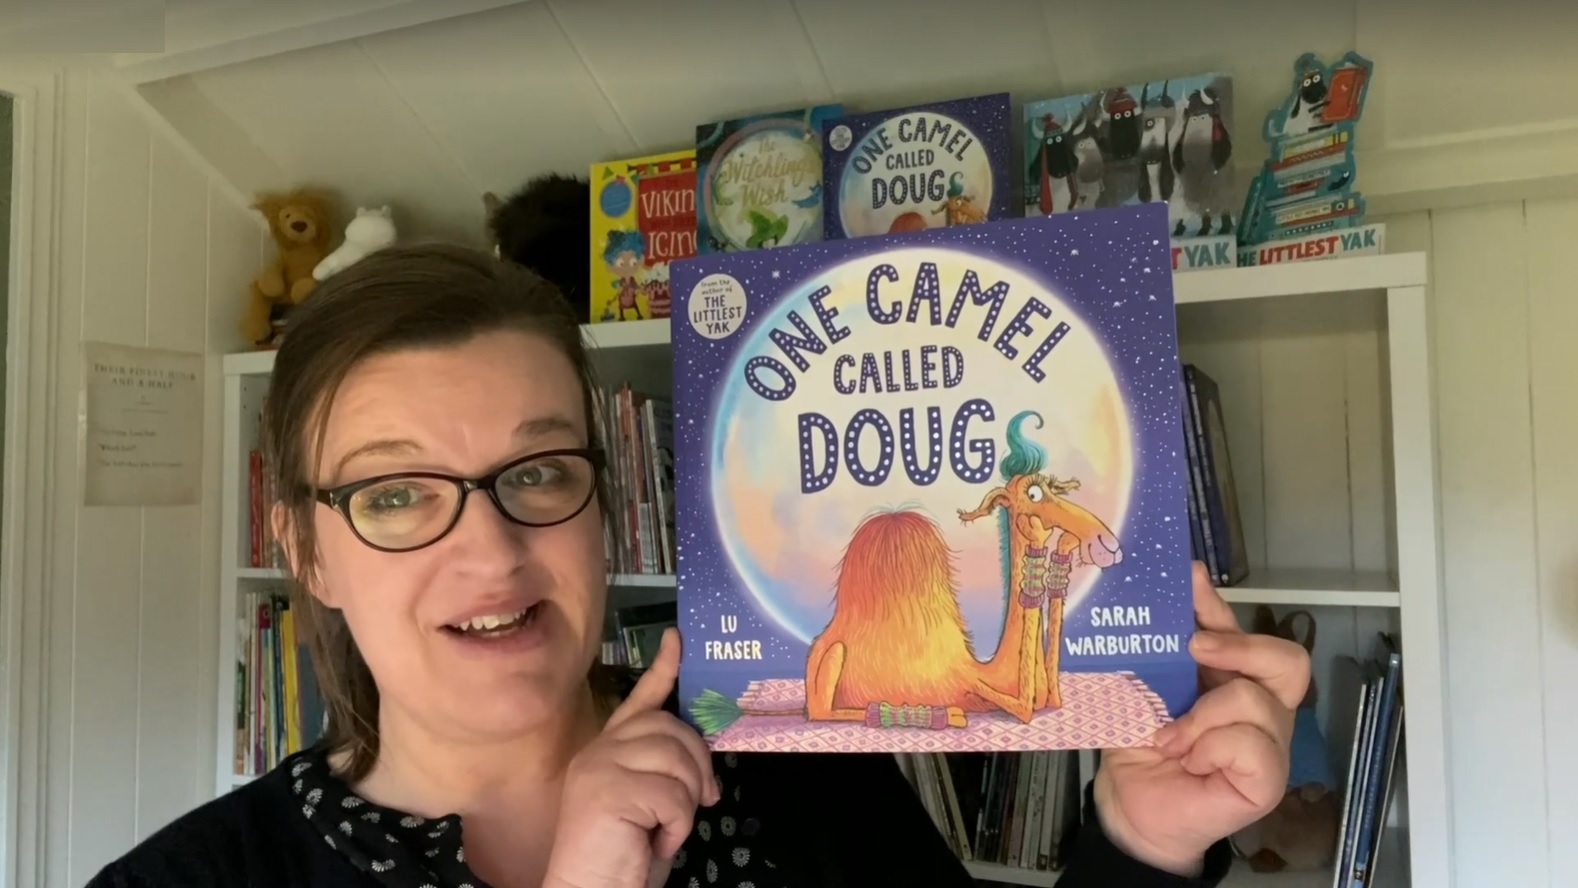 One Camel Called Doug by Lu Fraser